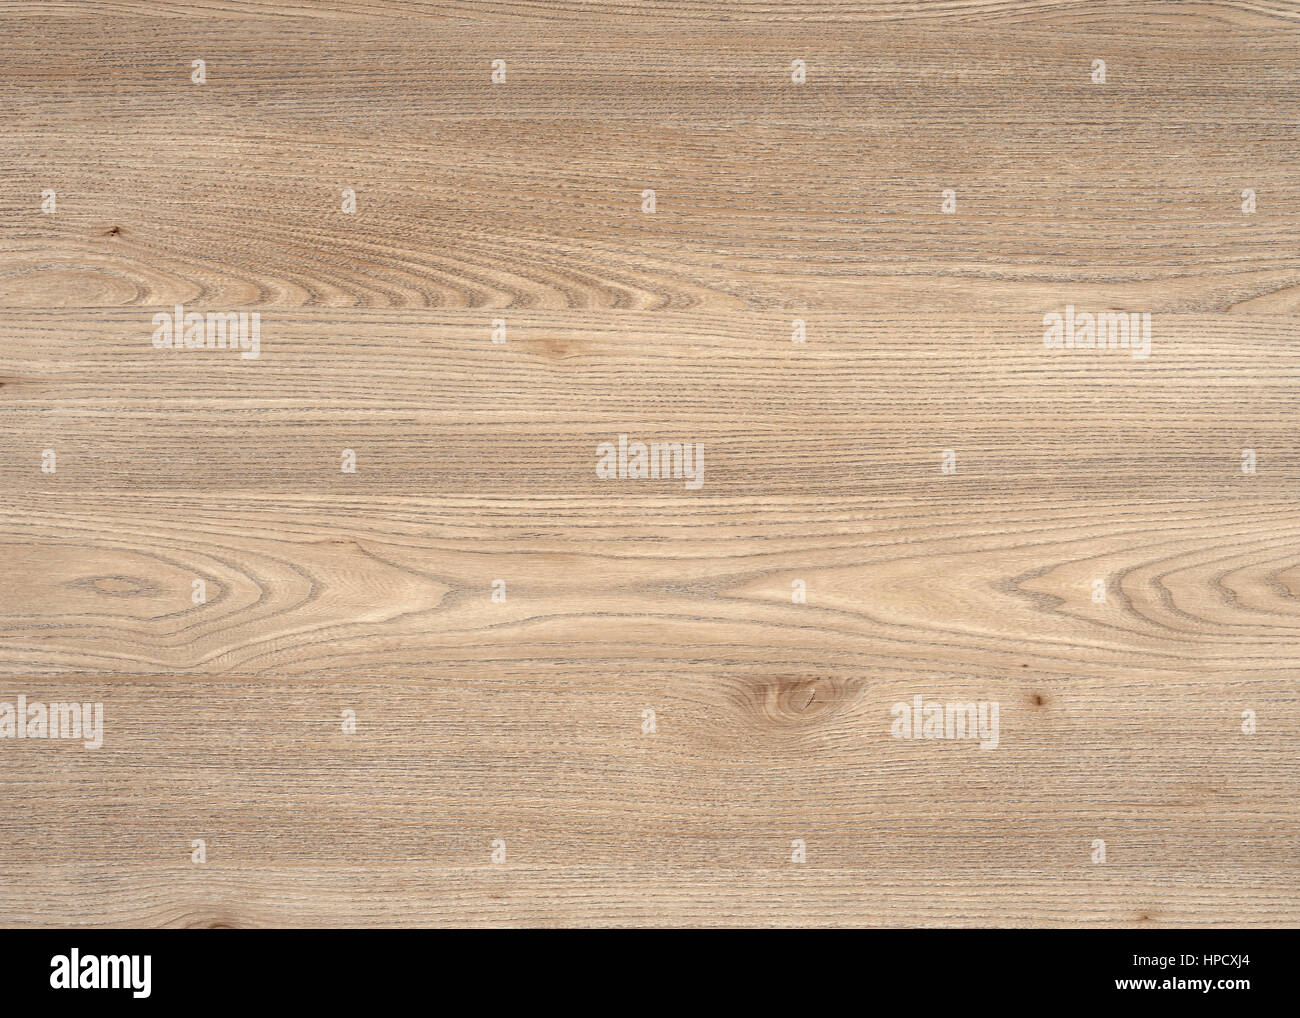 a full frame brown wood grain surface Stock Photo